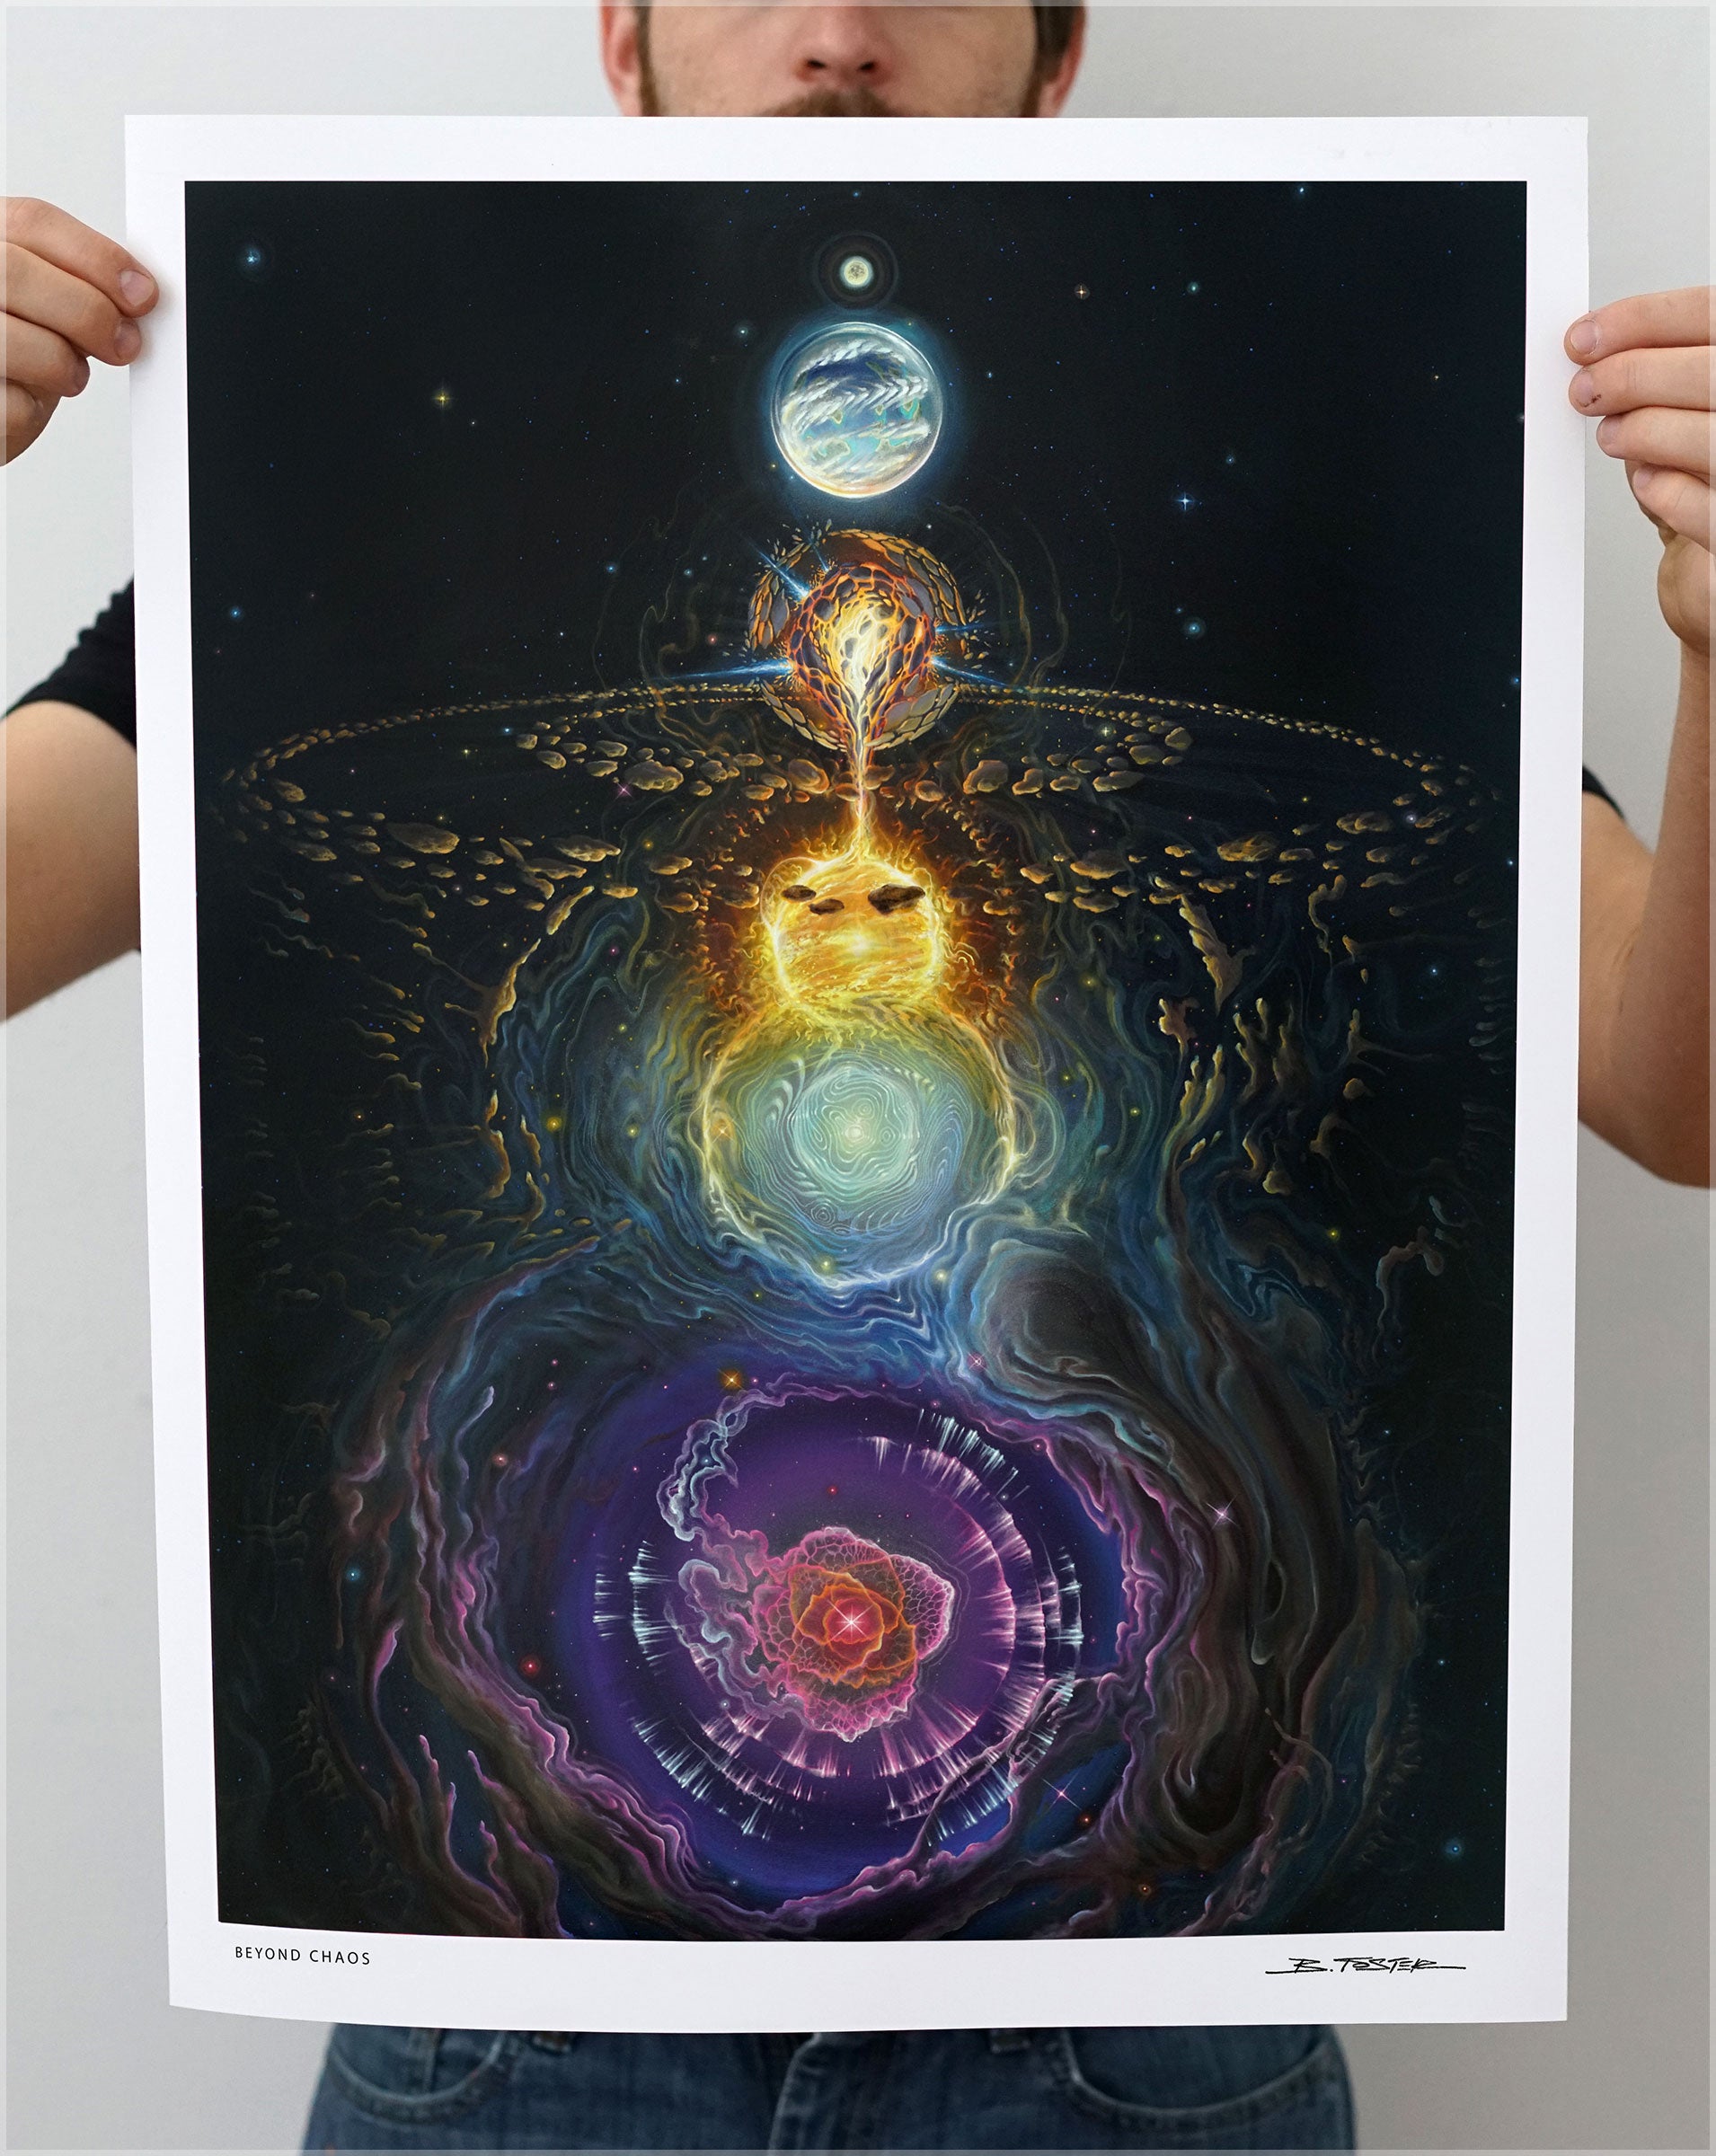 Beyond Chaos Signed Print by Blake Foster - 24 Hour Release